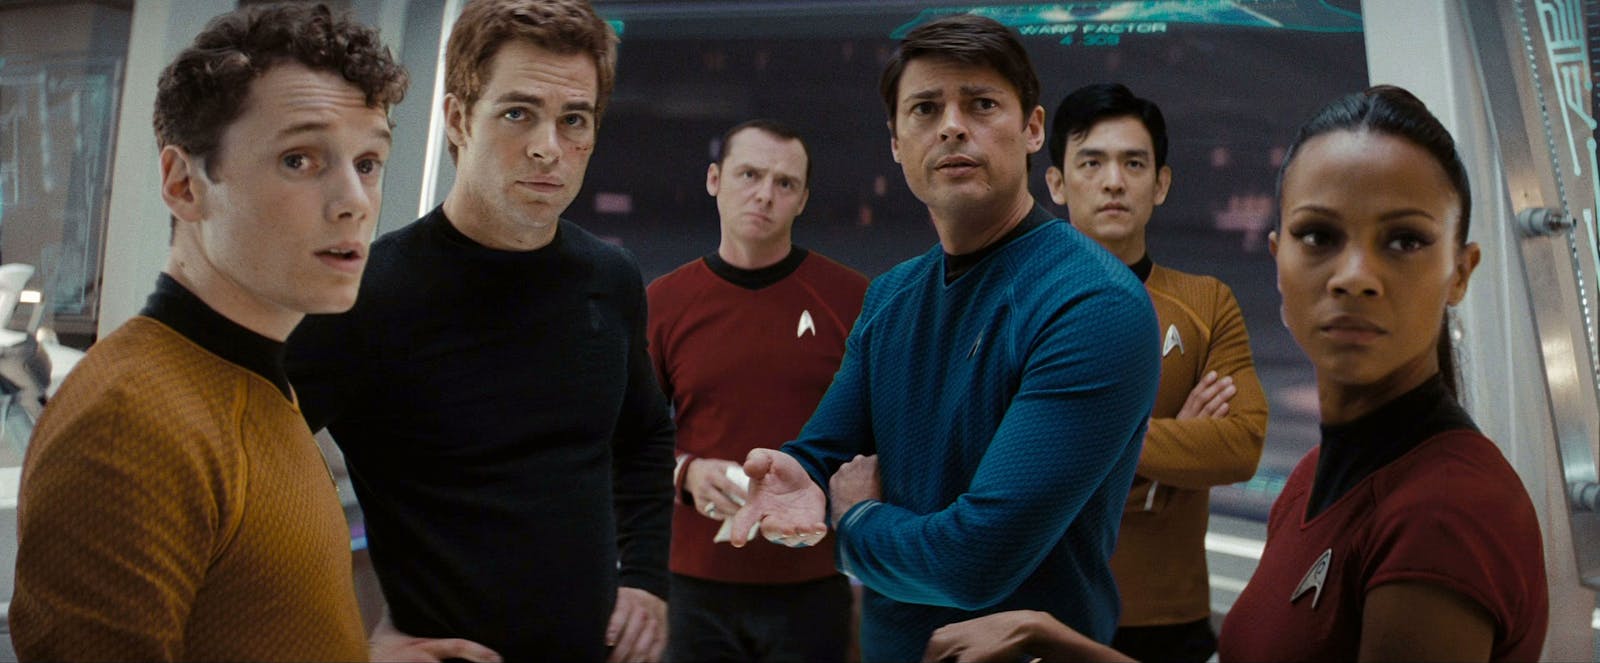 How to Watch Star Trek in Order: The Complete Series Timeline